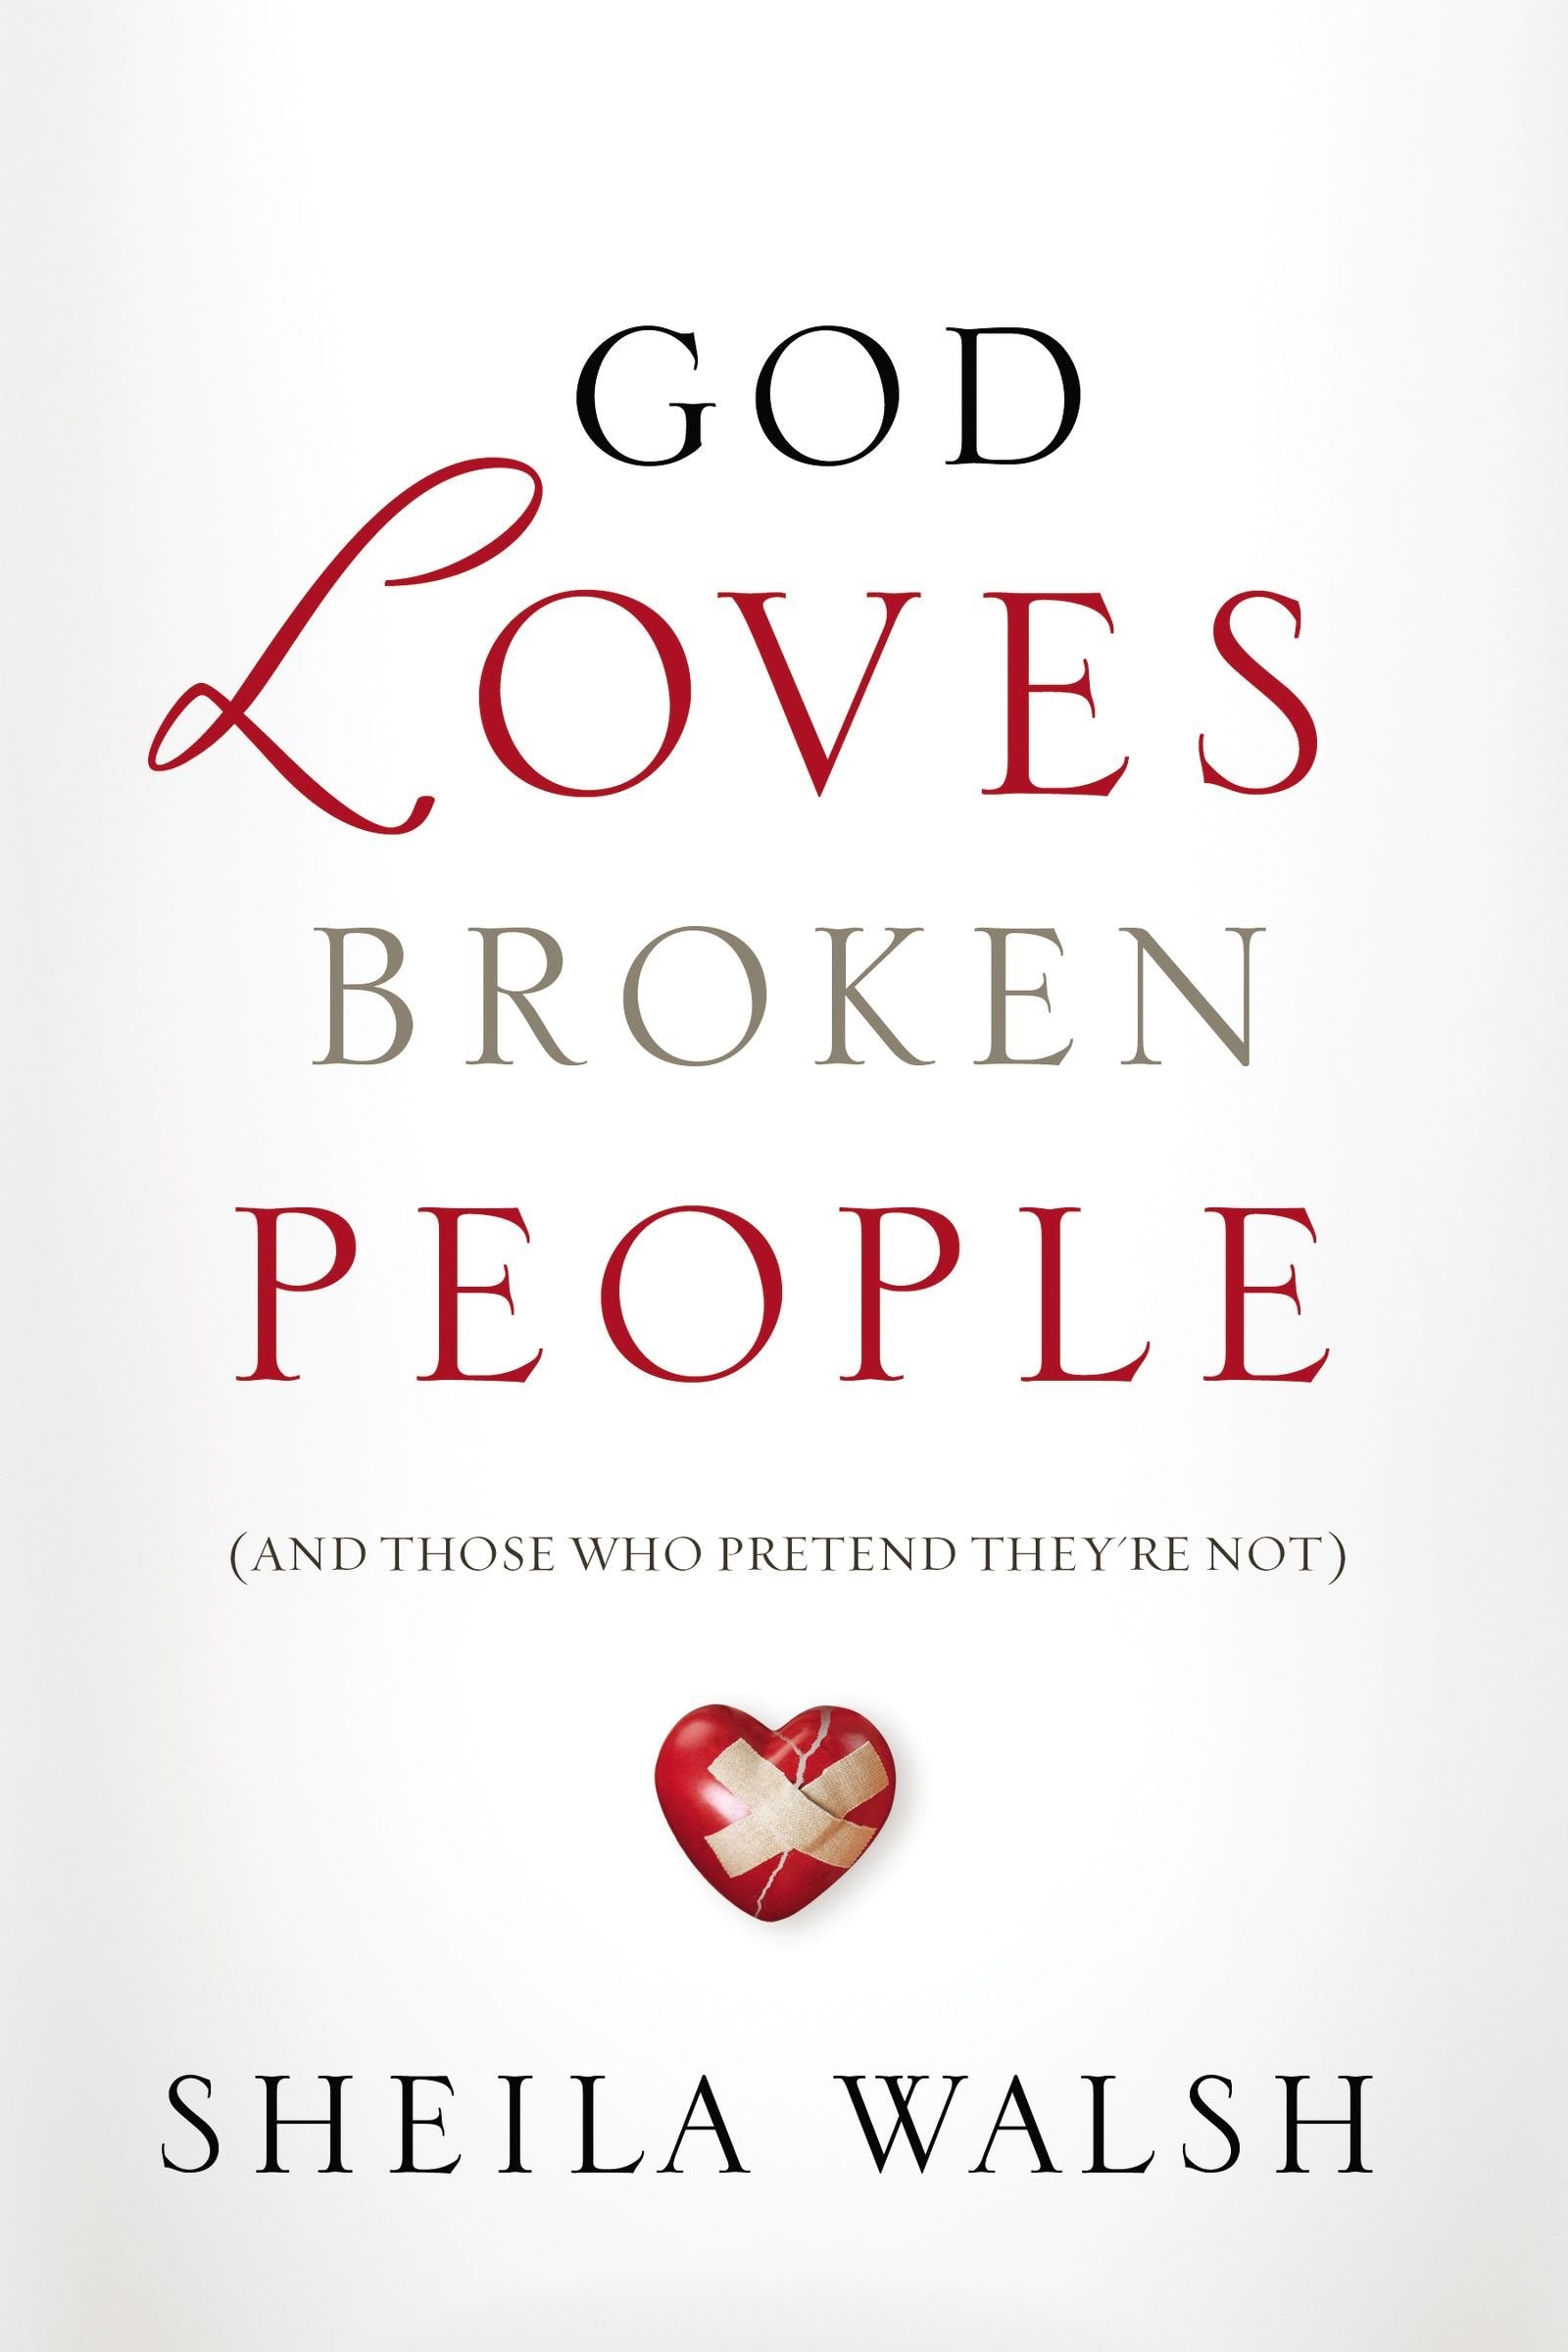 ROCKONLINE | New Creation Church | NCC | Joseph Prince | ROCK Bookshop | ROCK Bookstore | Star Vista | God Loves Broken People | Sheila Walsh | Free delivery for Singapore Orders above $50.